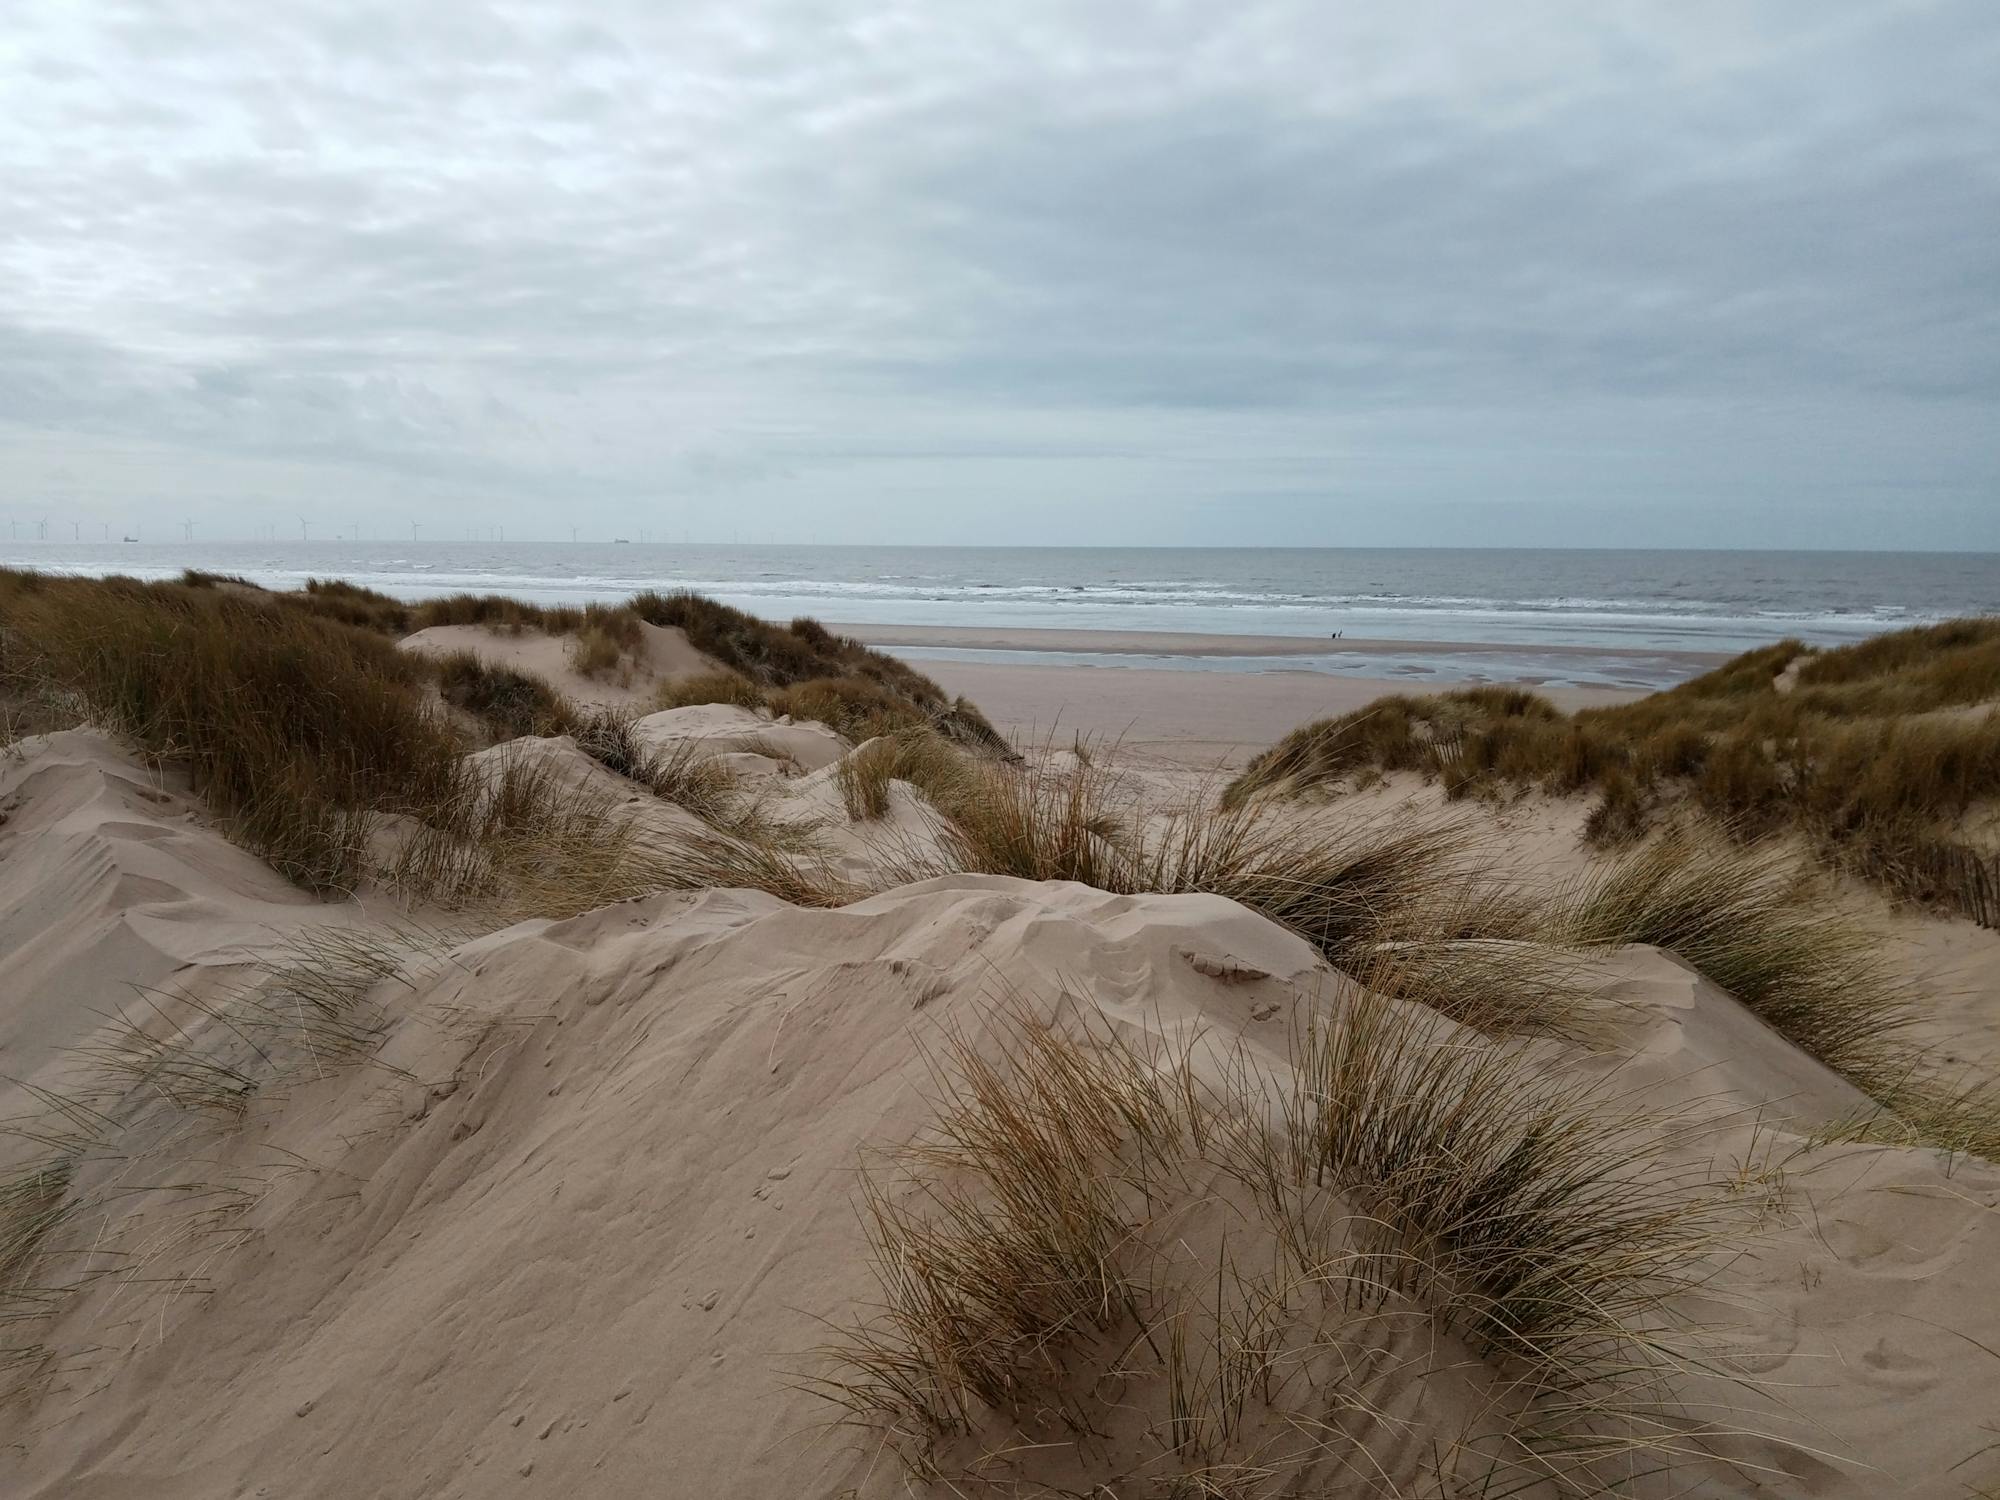 Looking across the dunes to the beach